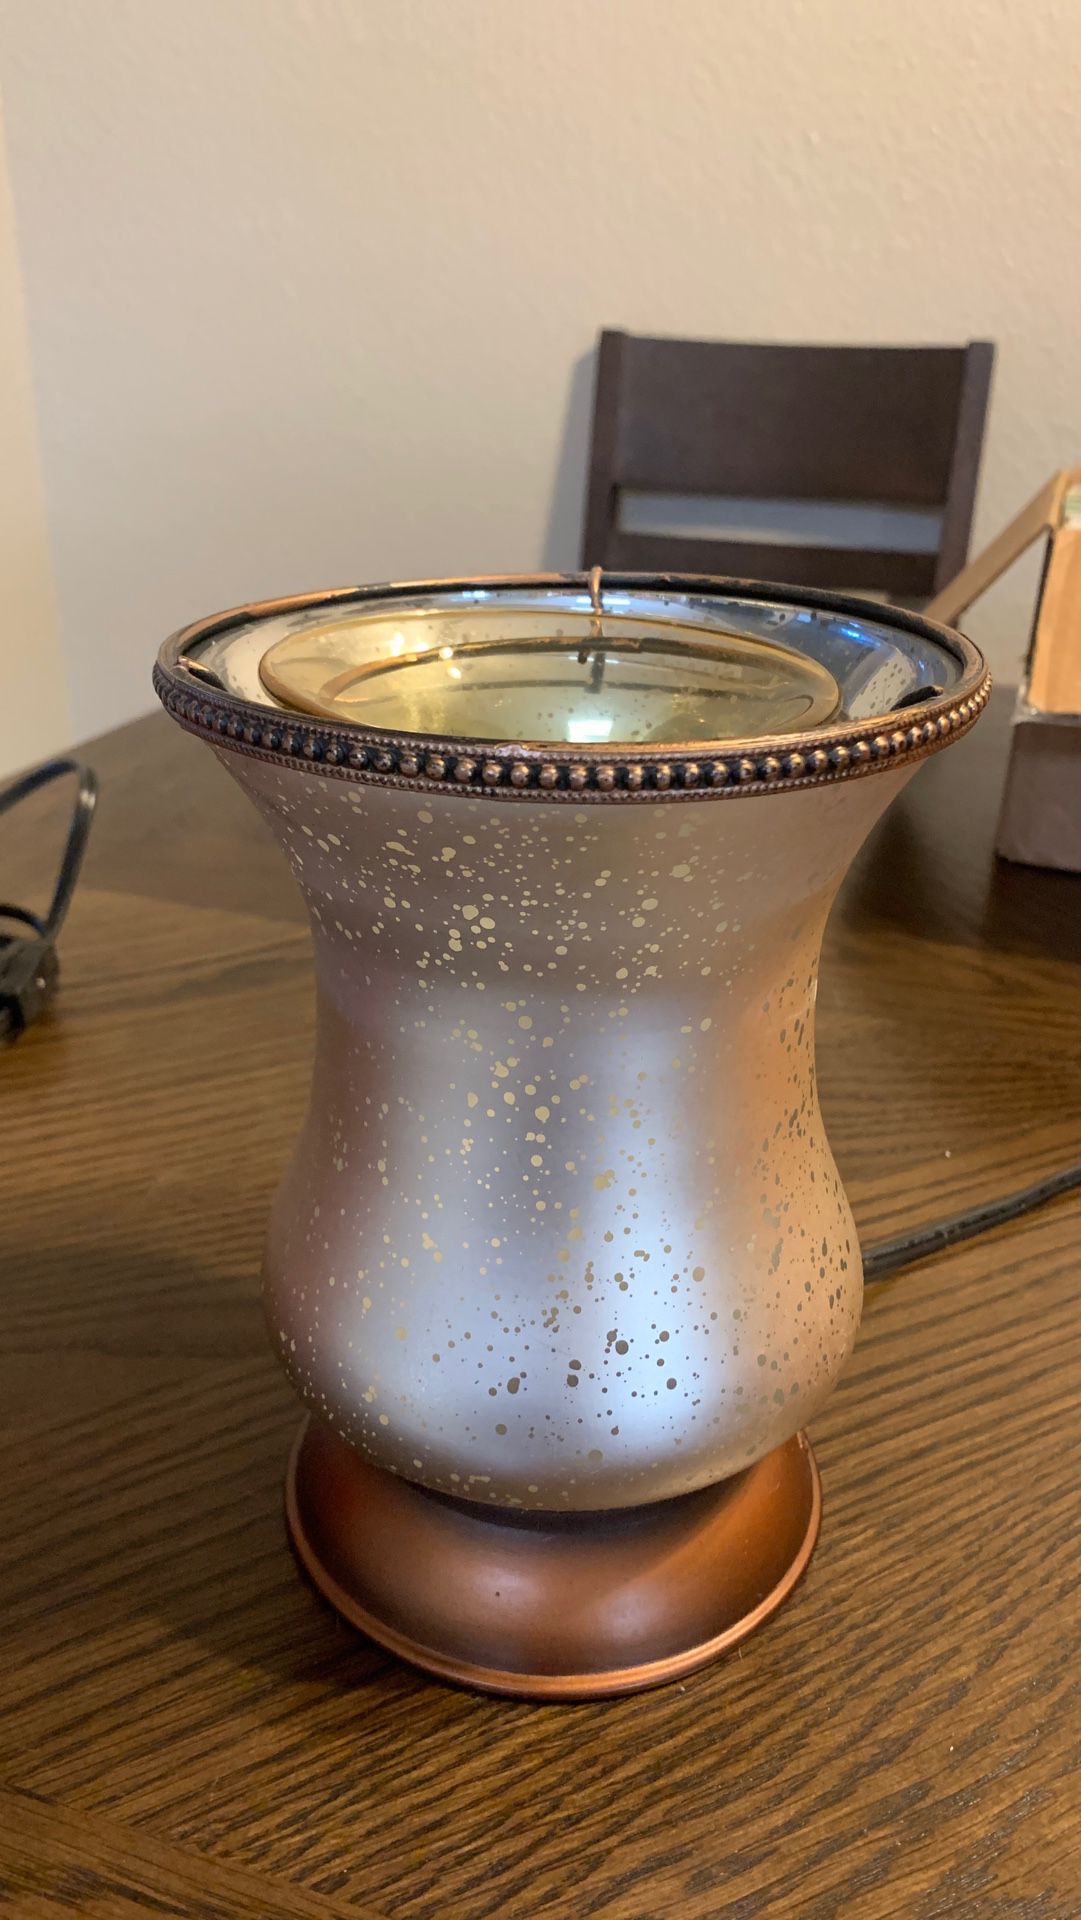 Scentsy large warmer